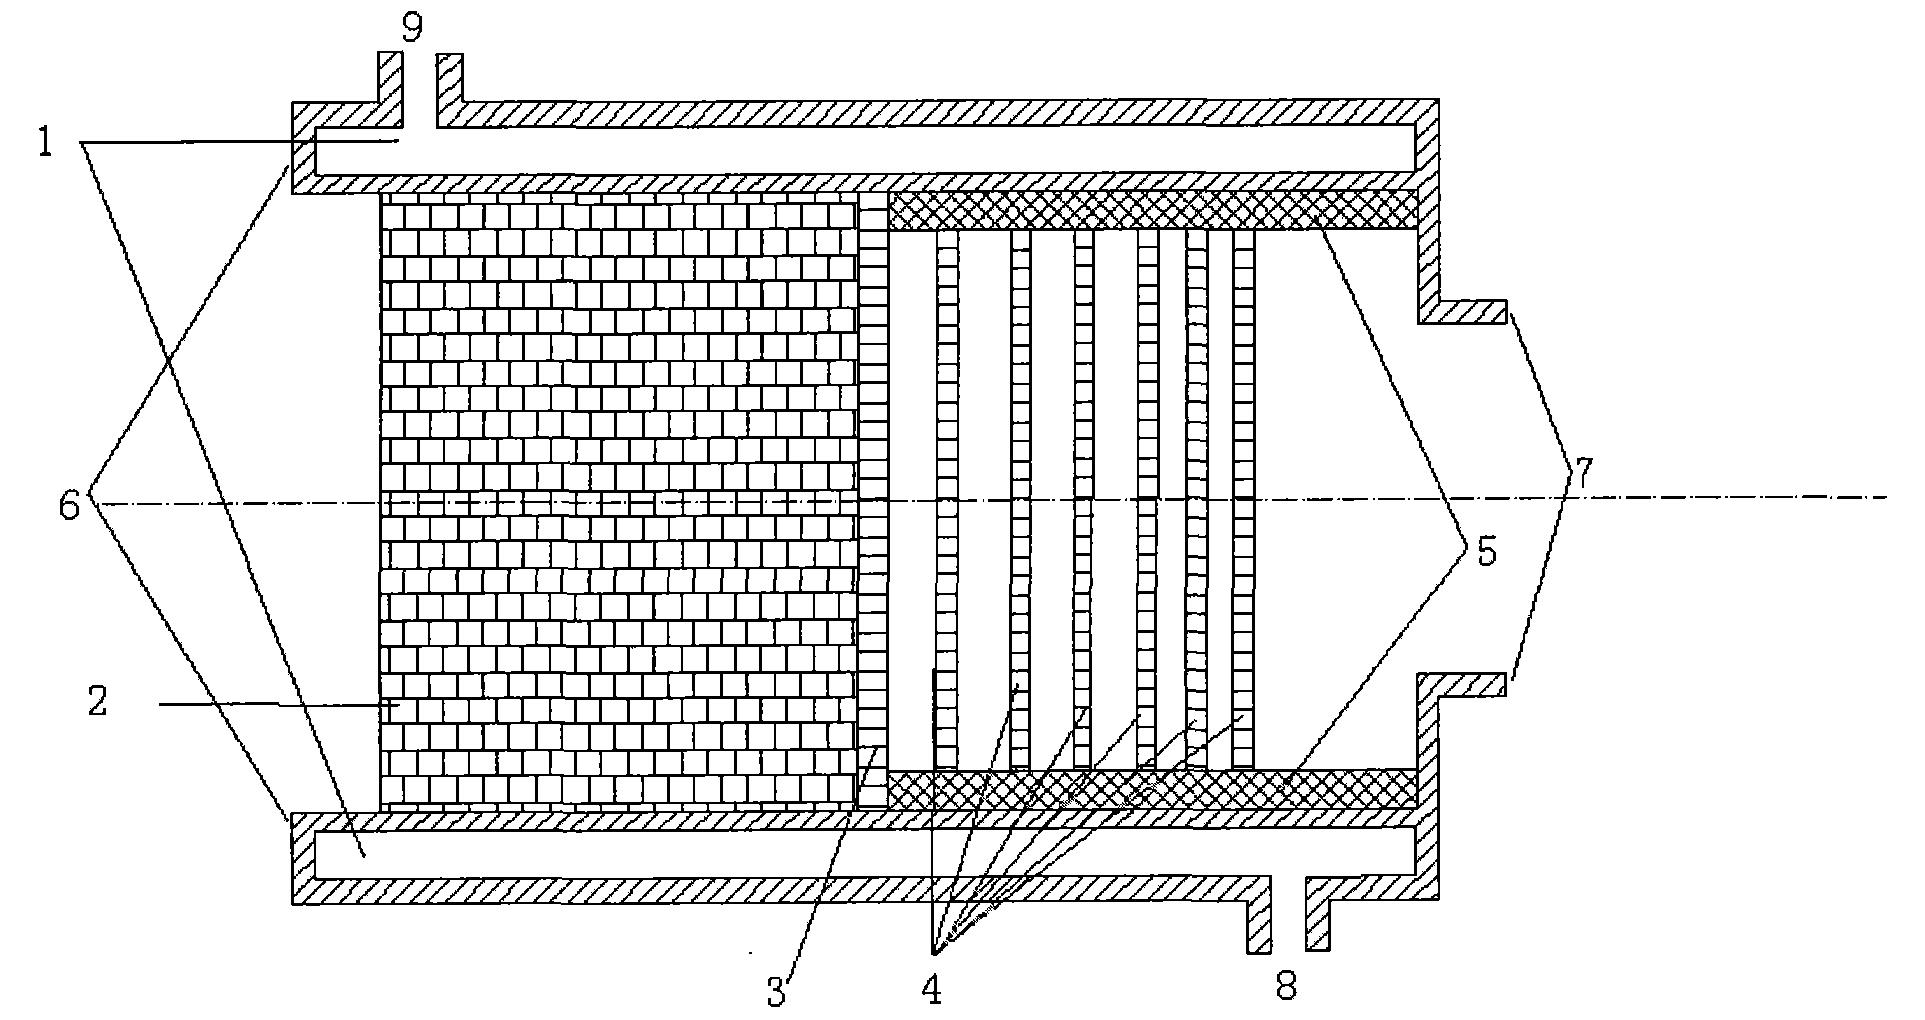 Tail gas filter for preparing gallium nitride by hydride or chloride vapor phase epitaxy